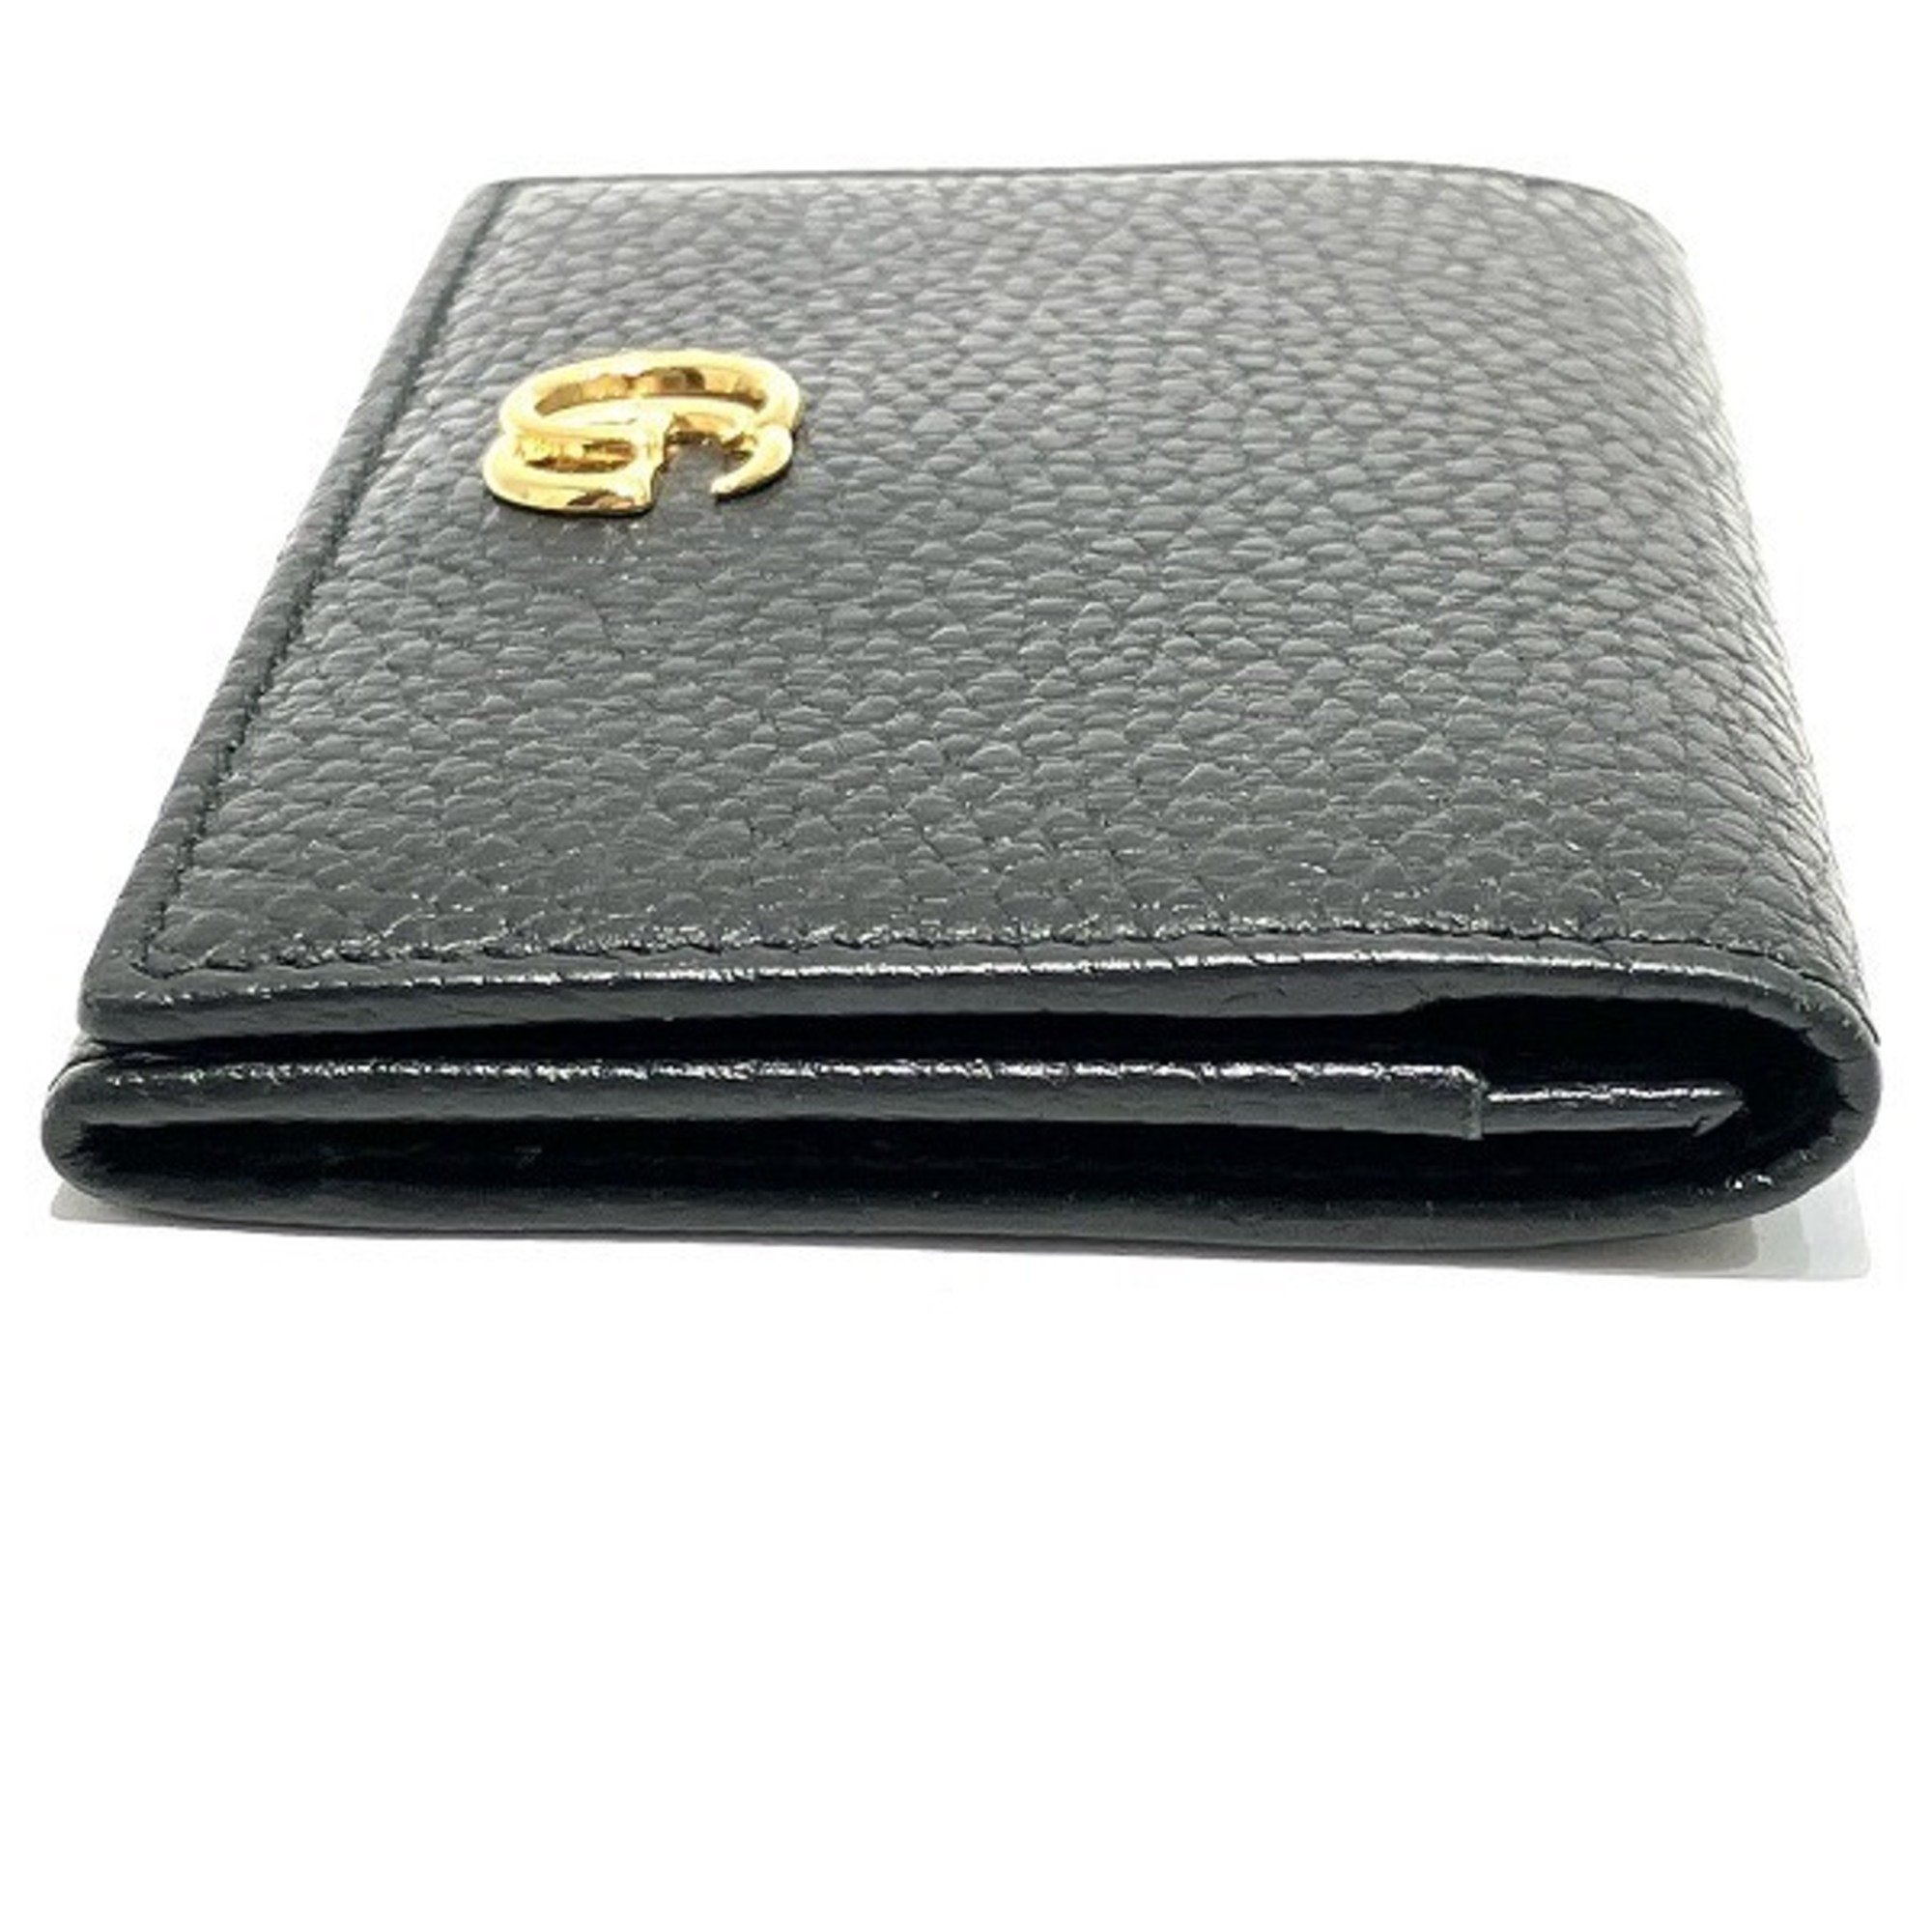 GUCCI Petit Marmont 474748 Brand Accessories Business Card Holder Women's Wallet